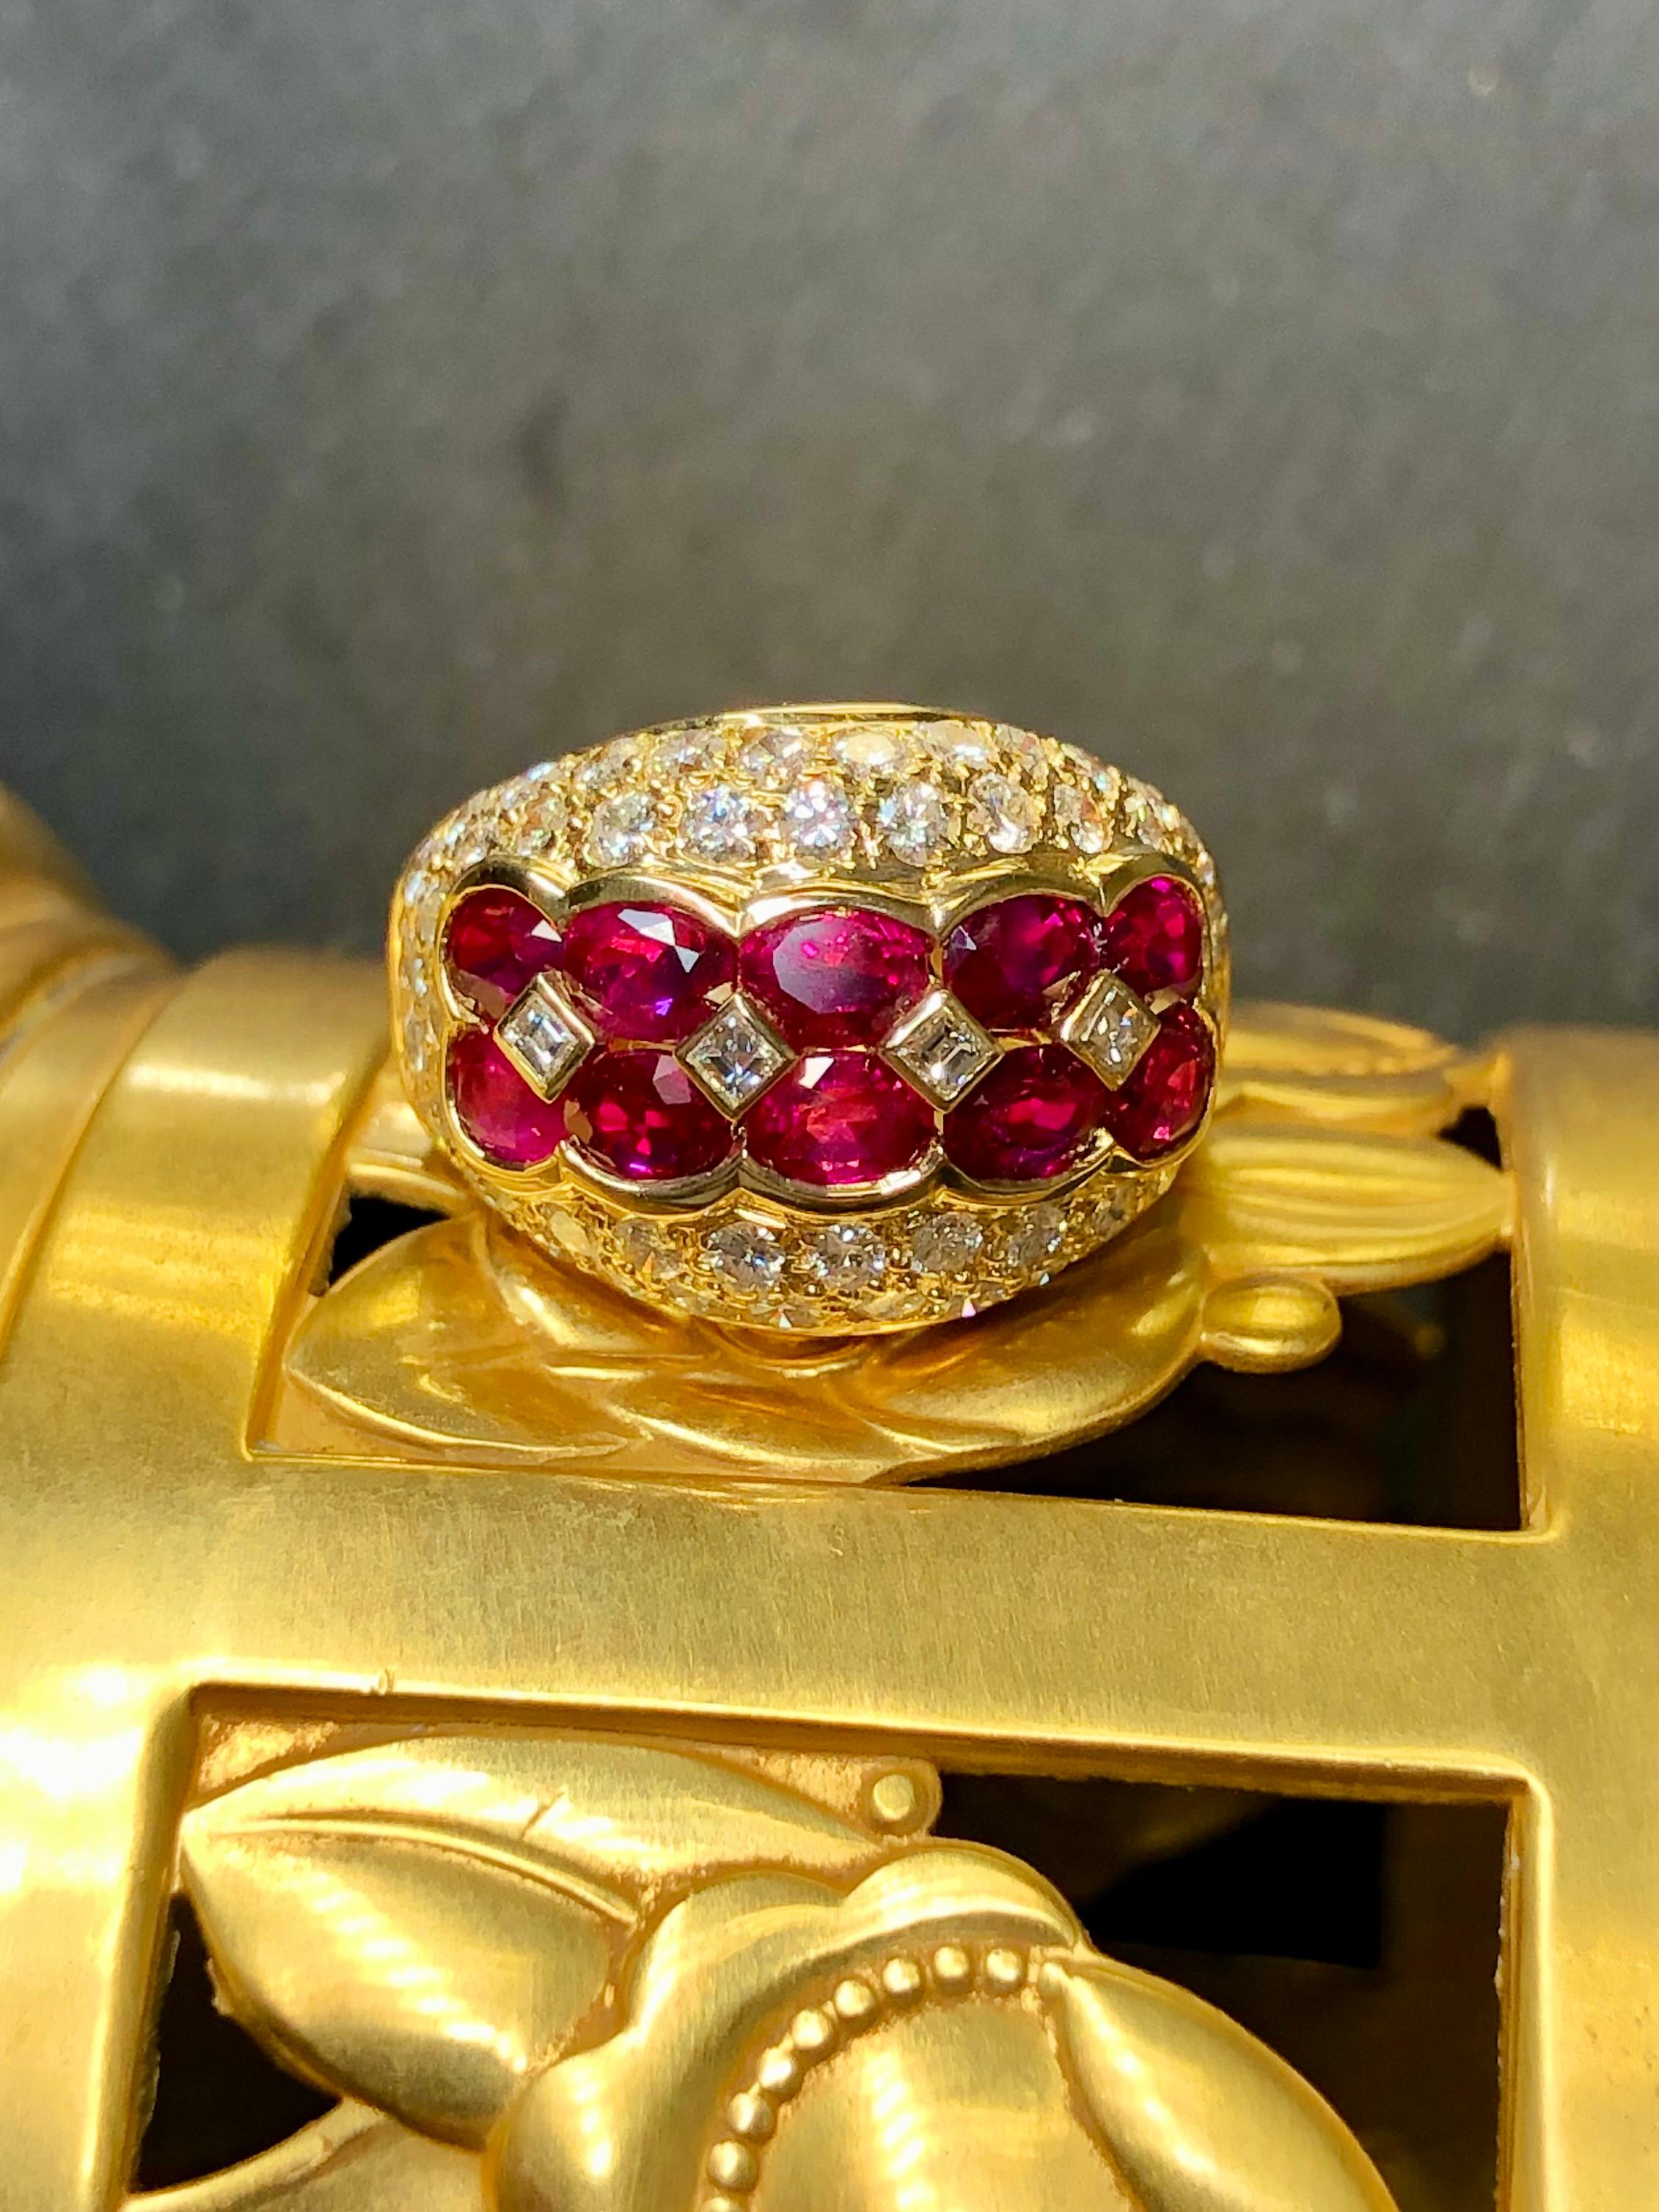 An impressive cocktail ring that just sparkles! It is done in 18K yellow gold and centered by 10 larger oval natural bright red rubies separated by bezel set square baguette diamonds. Surrounding the rubies are pave round diamonds averaging G-I